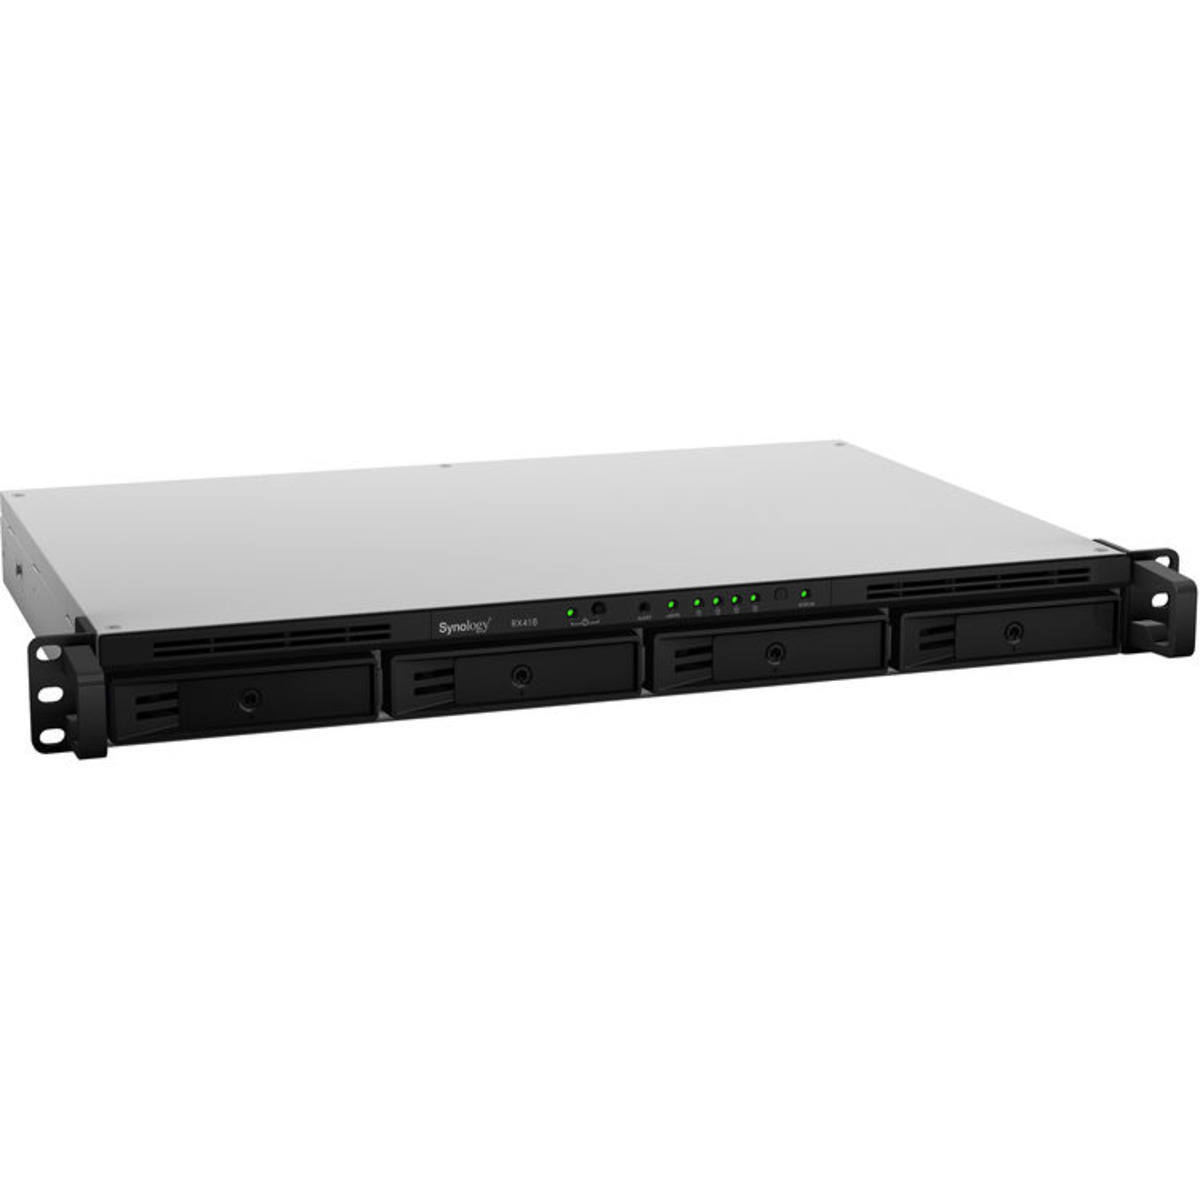 Synology RX418 External Expansion Drive 48tb 4-Bay RackMount Multimedia / Power User / Business Expansion Enclosure 4x12tb Seagate IronWolf Pro ST12000NT001 3.5 7200rpm SATA 6Gb/s HDD NAS Class Drives Installed - Burn-In Tested - ON SALE RX418 External Expansion Drive